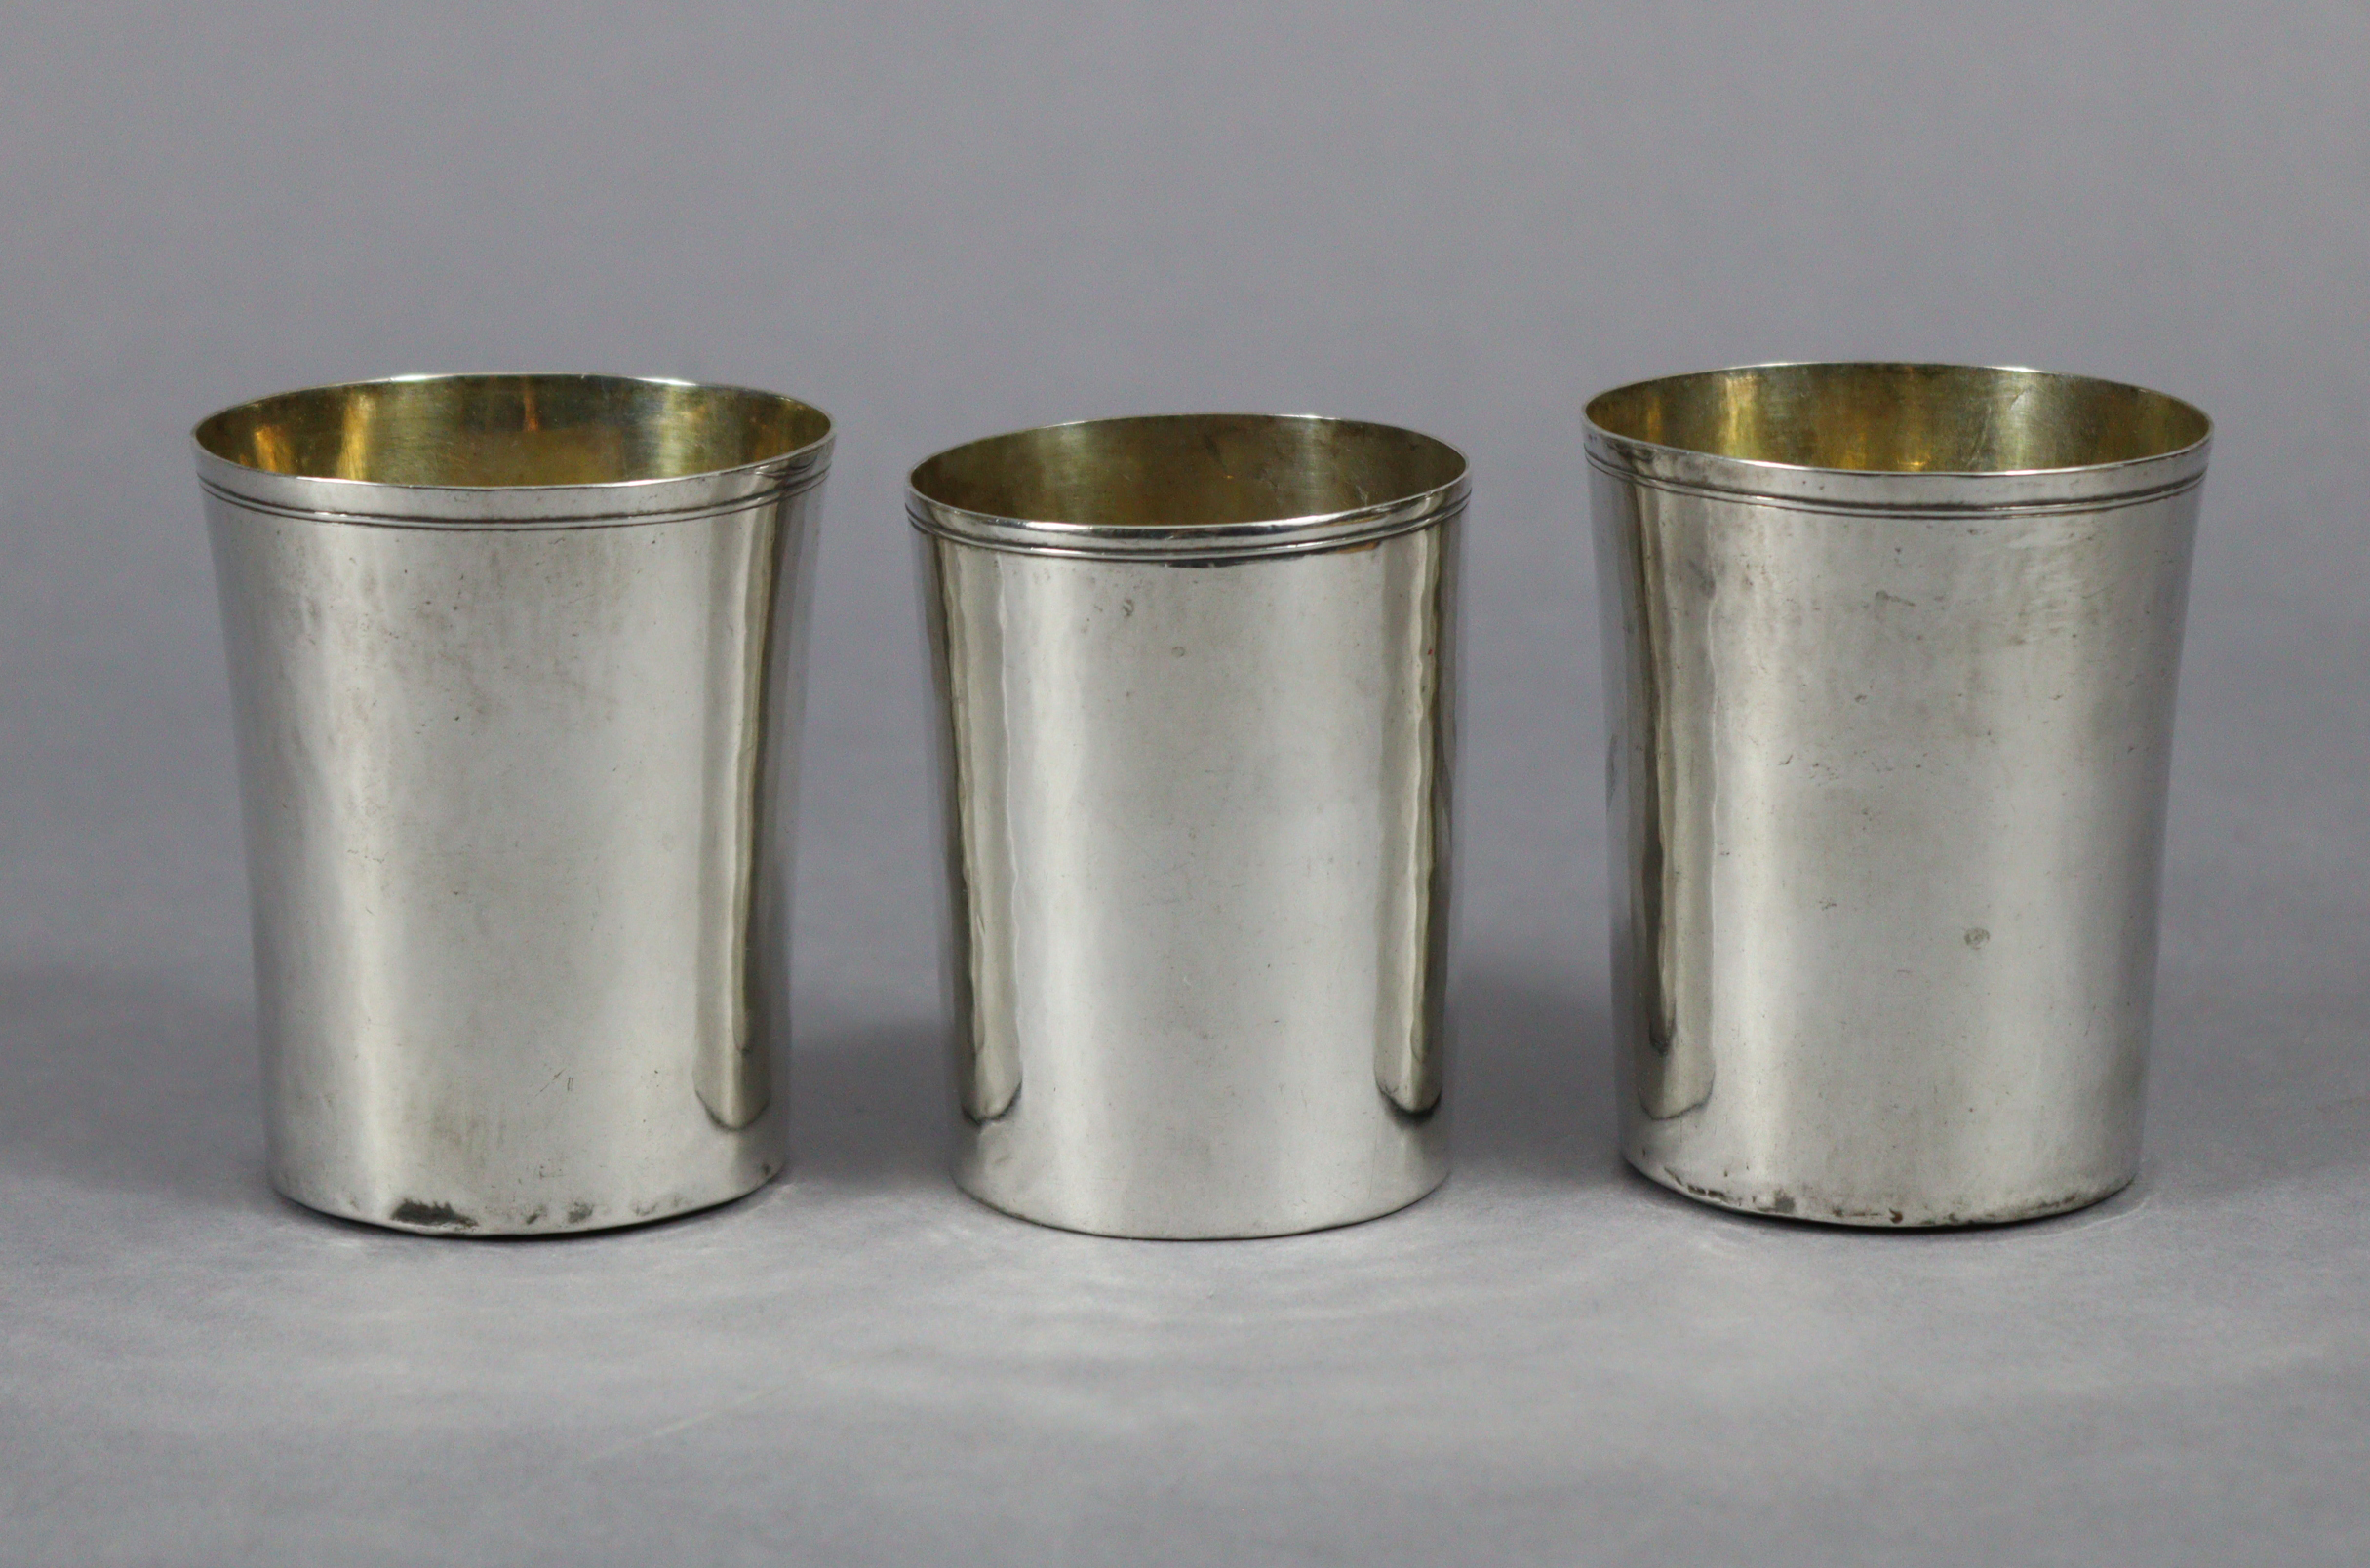 A pair of continental plain beakers with gilt interiors, 3” high x 2.5” diam., & a slightly